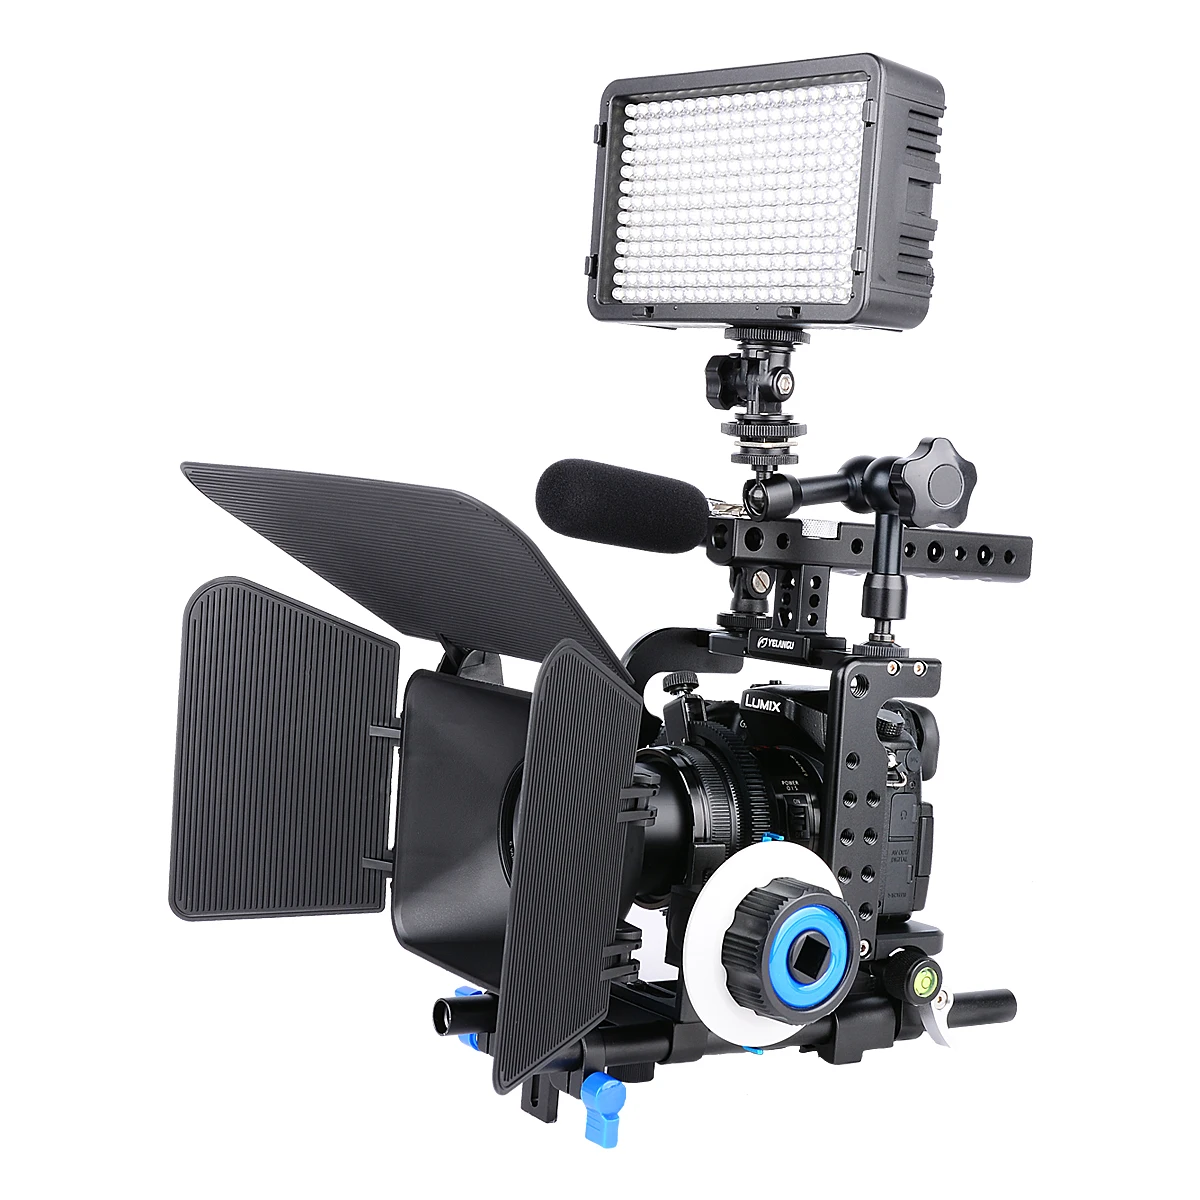 

GH5 Camera Cage Rig Film Movie Making Video Stabilizer Cage Kit Matte Box Follow Focus Handle Grip for Panasonic Lumix GH5S GH4